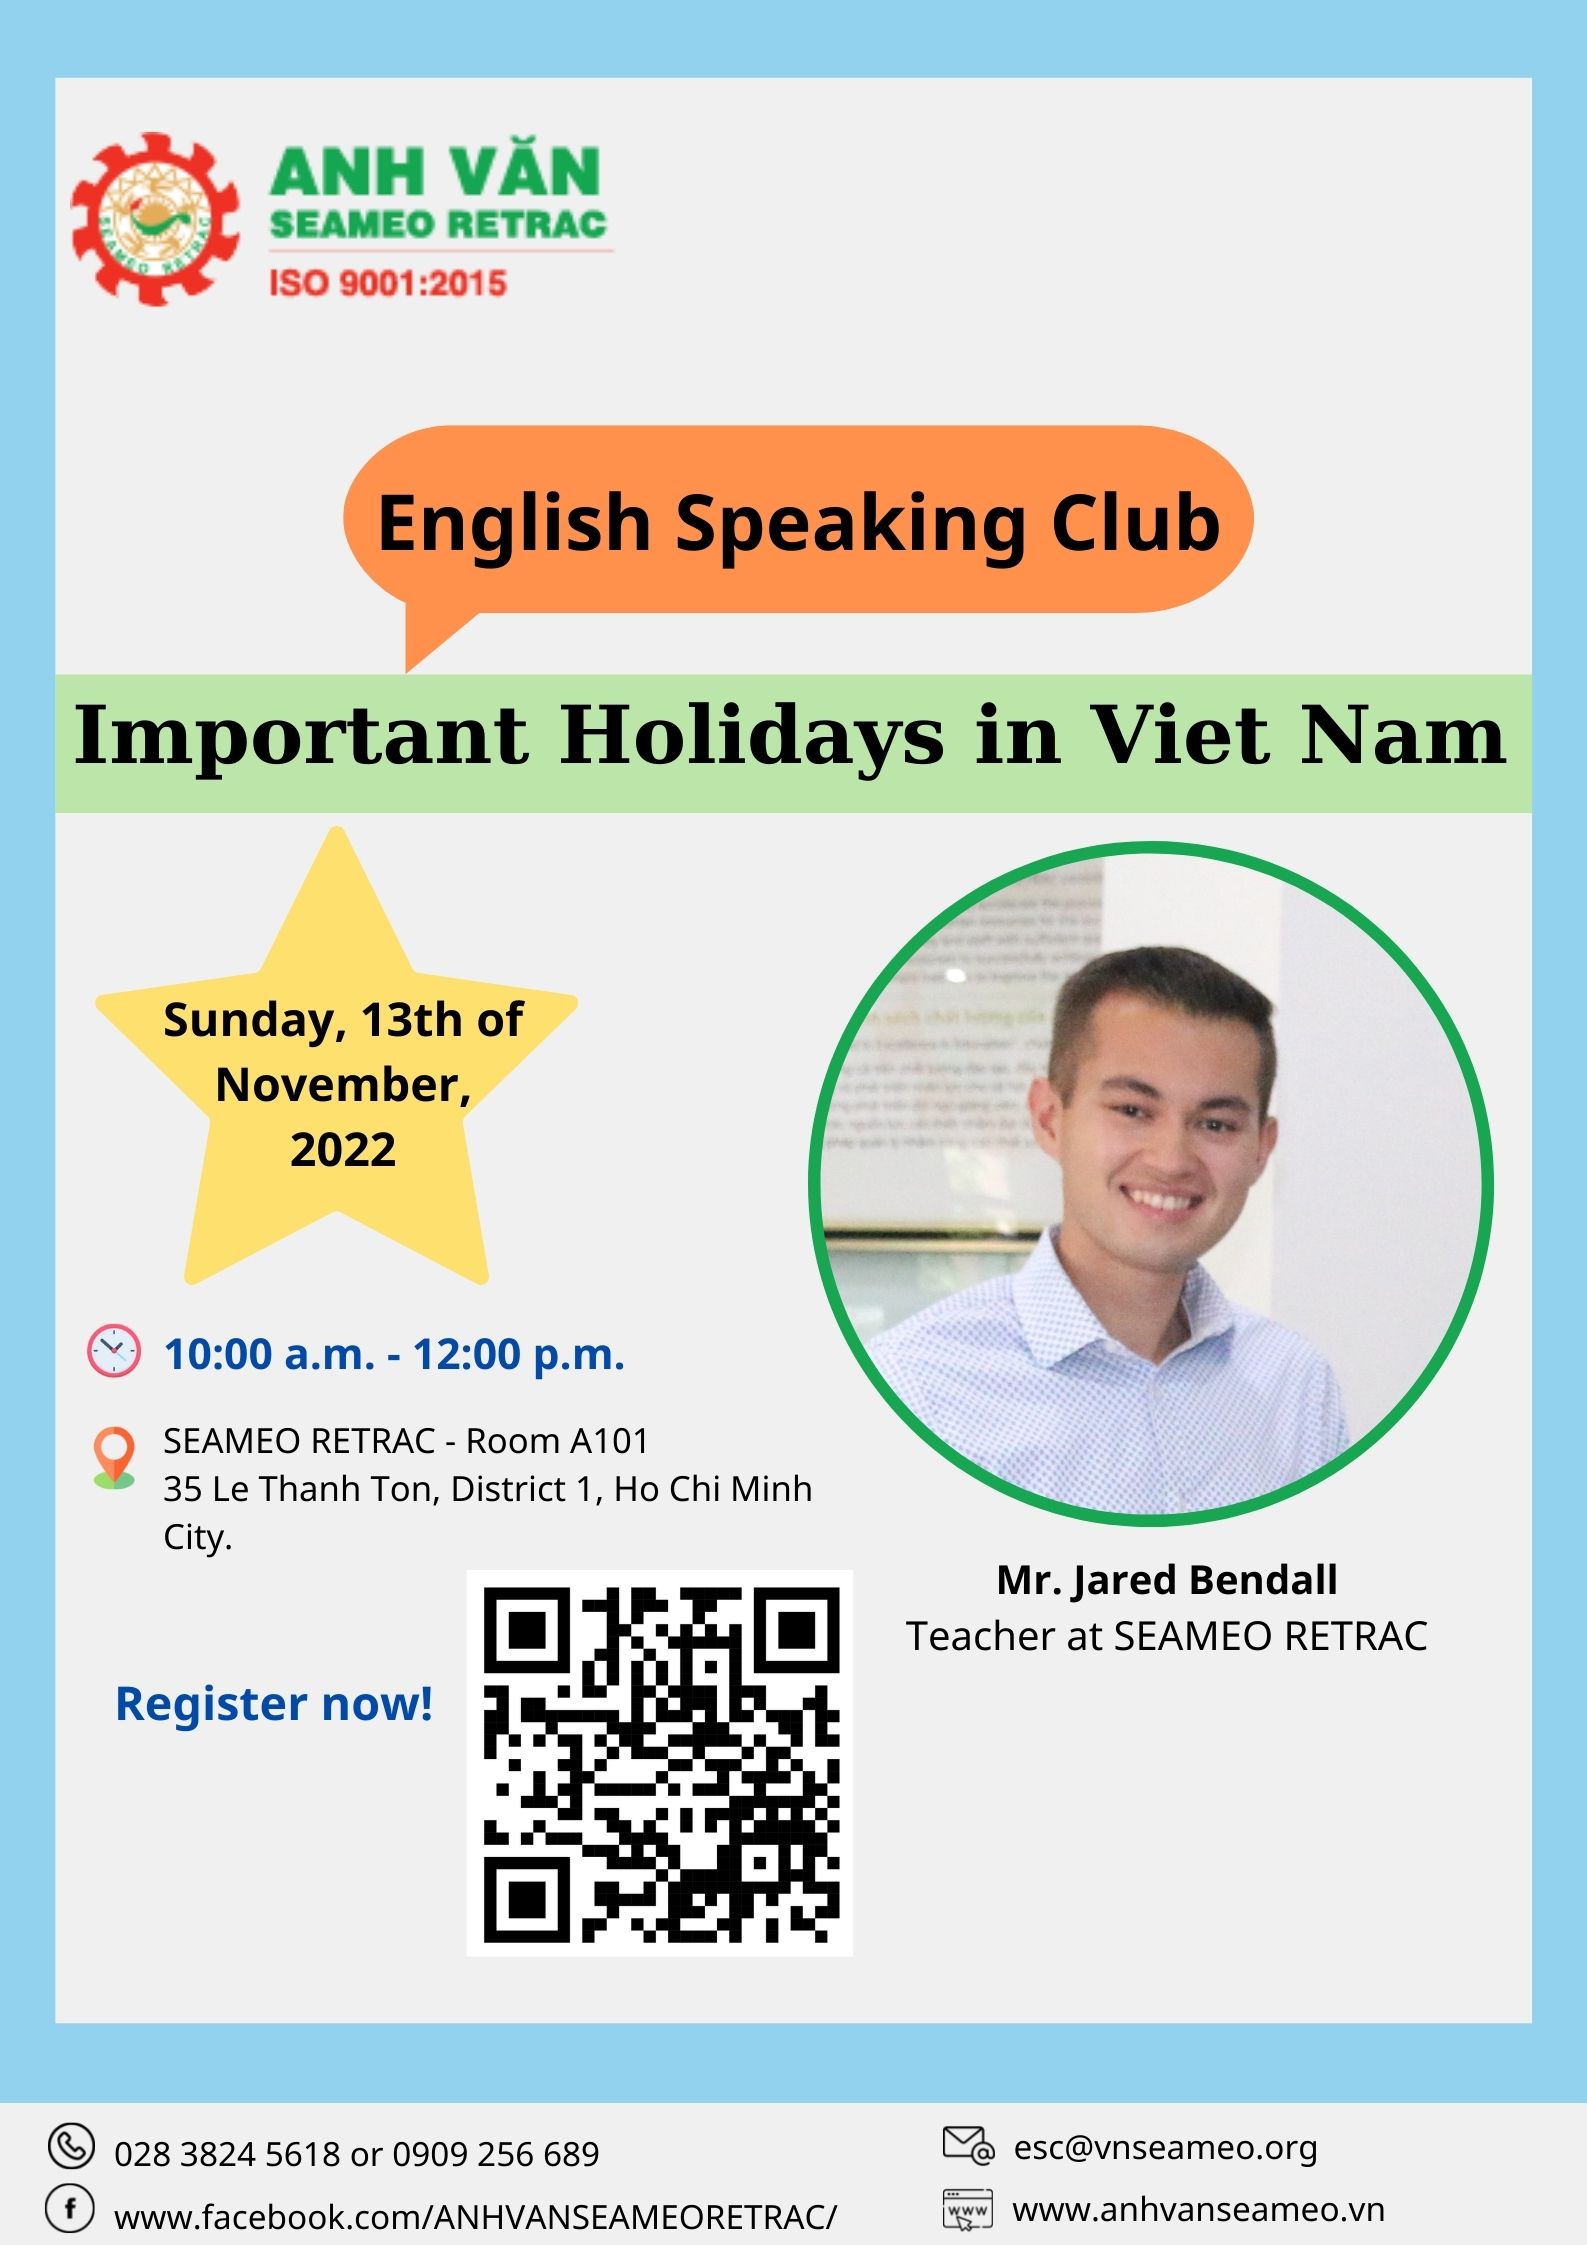 English speaking club titled “IMPORTANT HOLIDAYS IN VIET NAM”